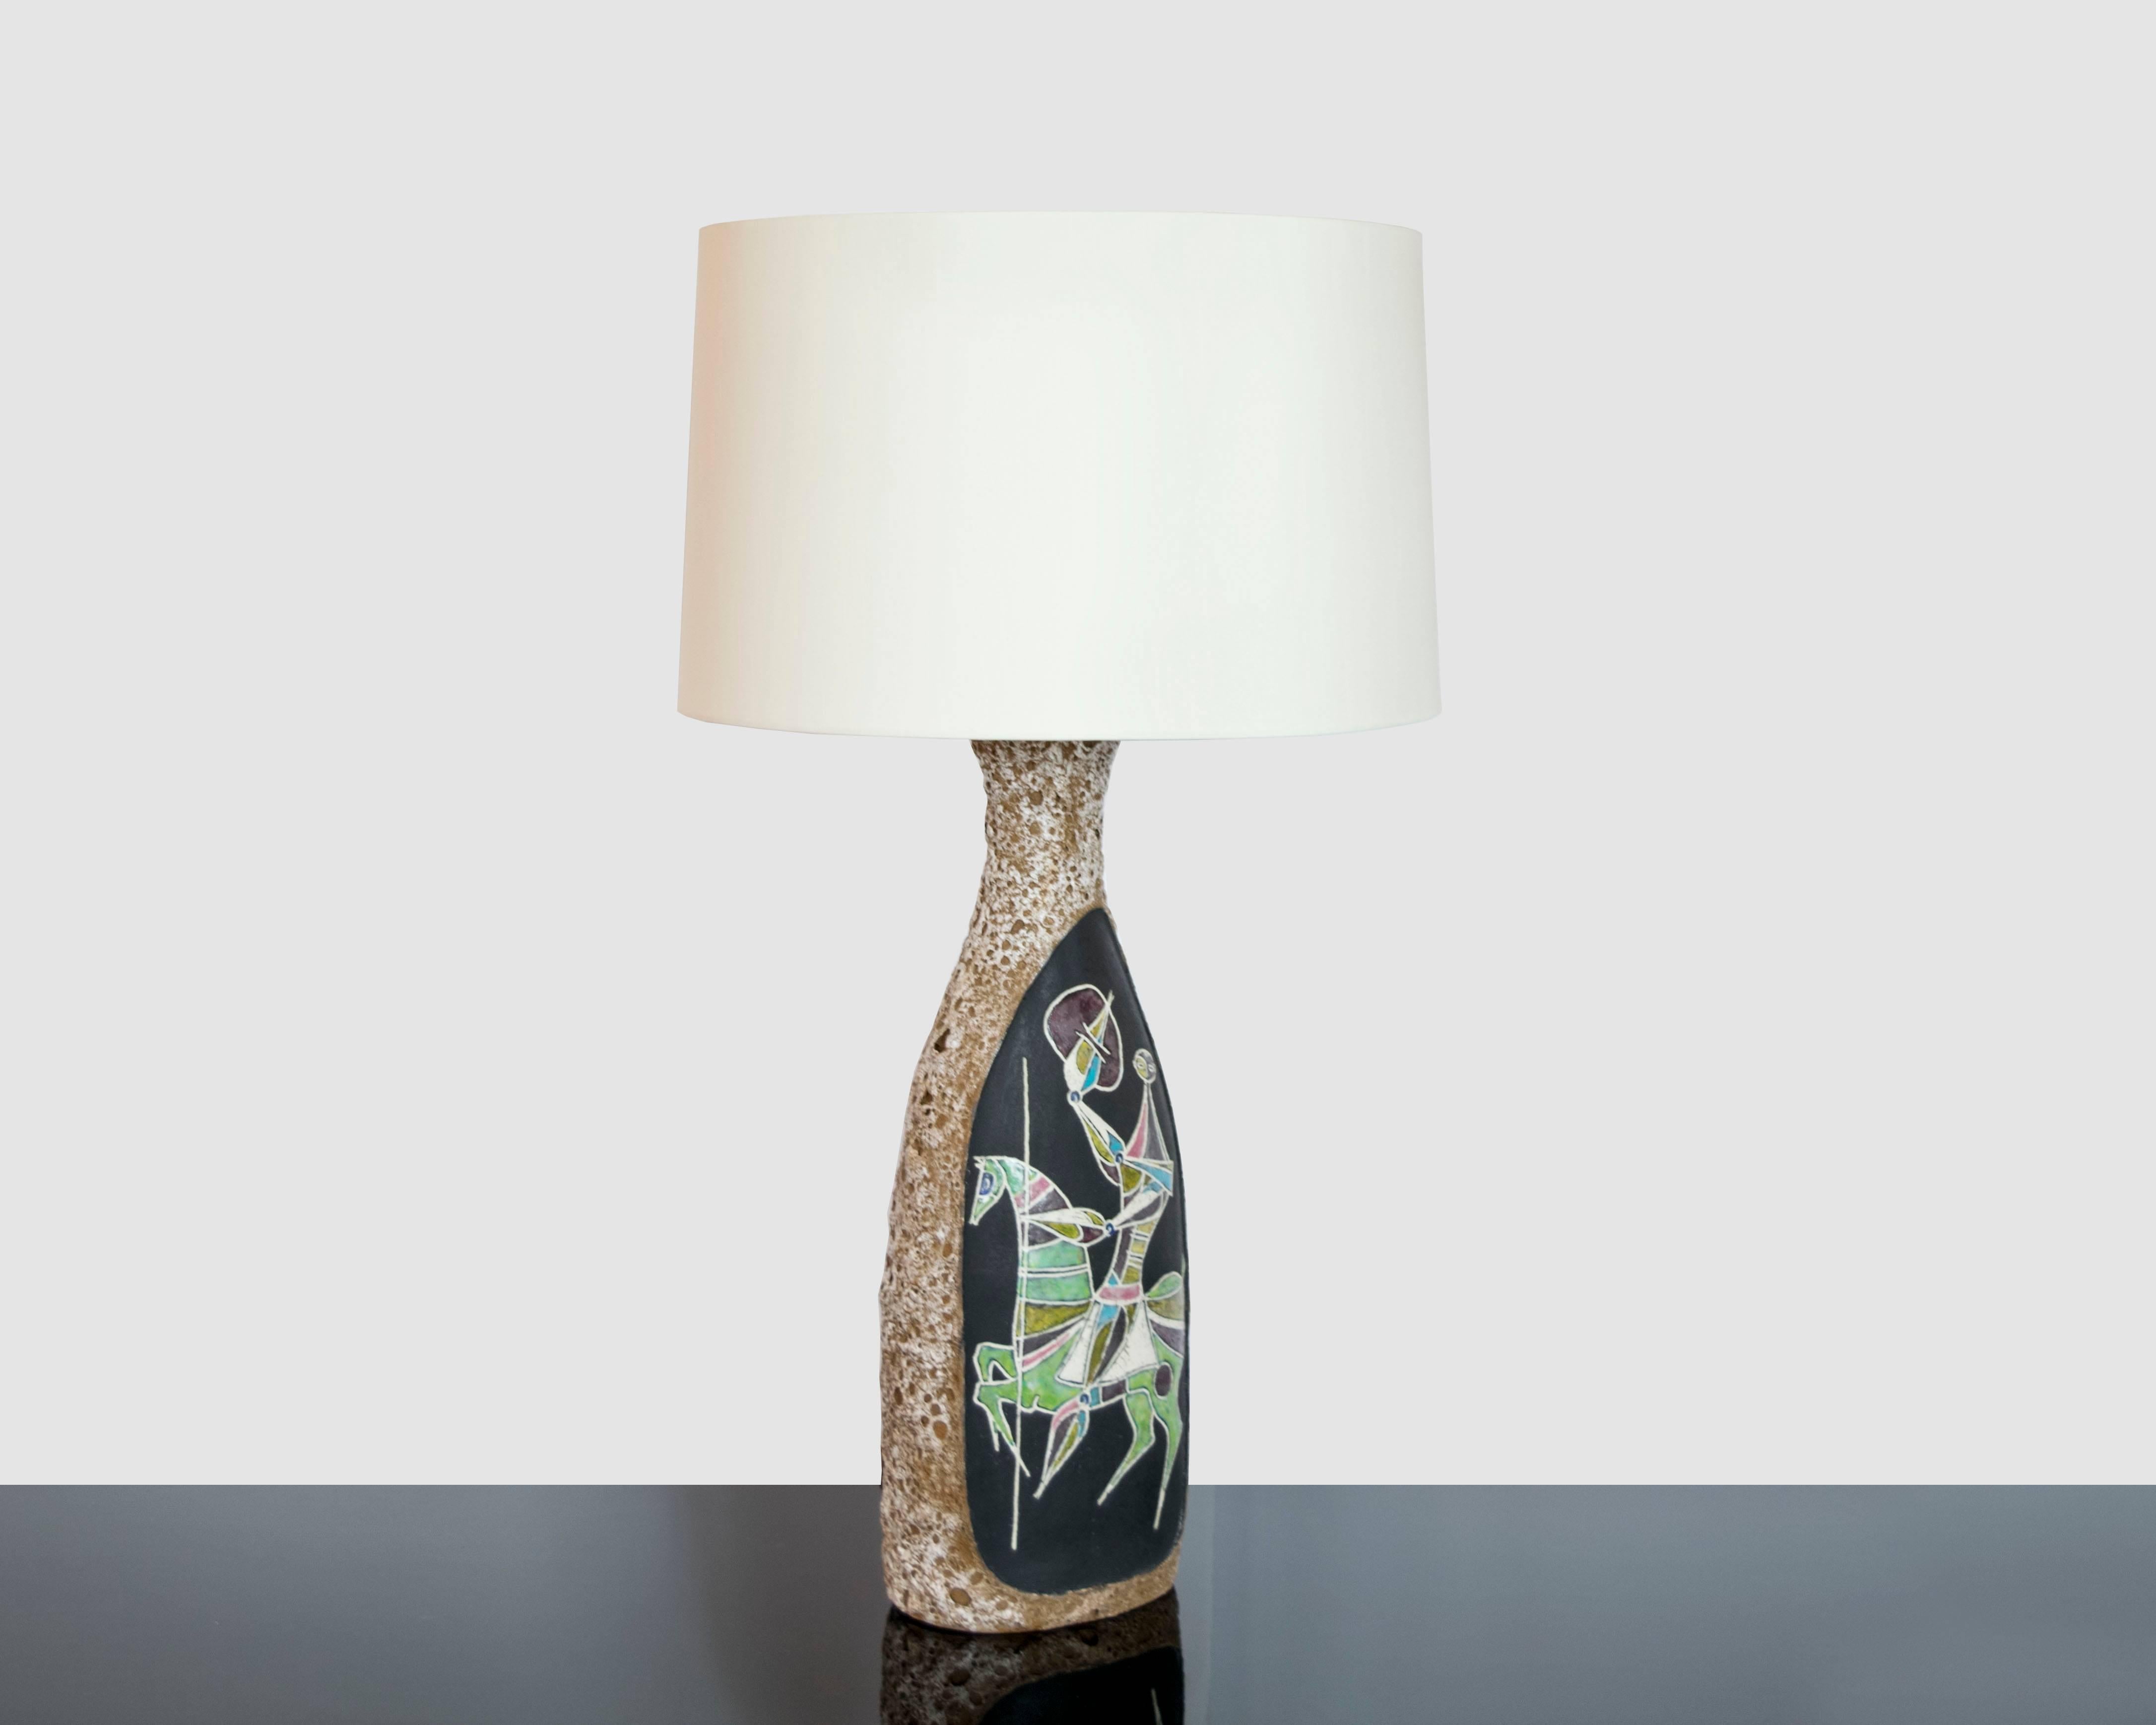 Italian Hand-Painted and Signed Fantoni Table Lamp from the 1950s For Sale